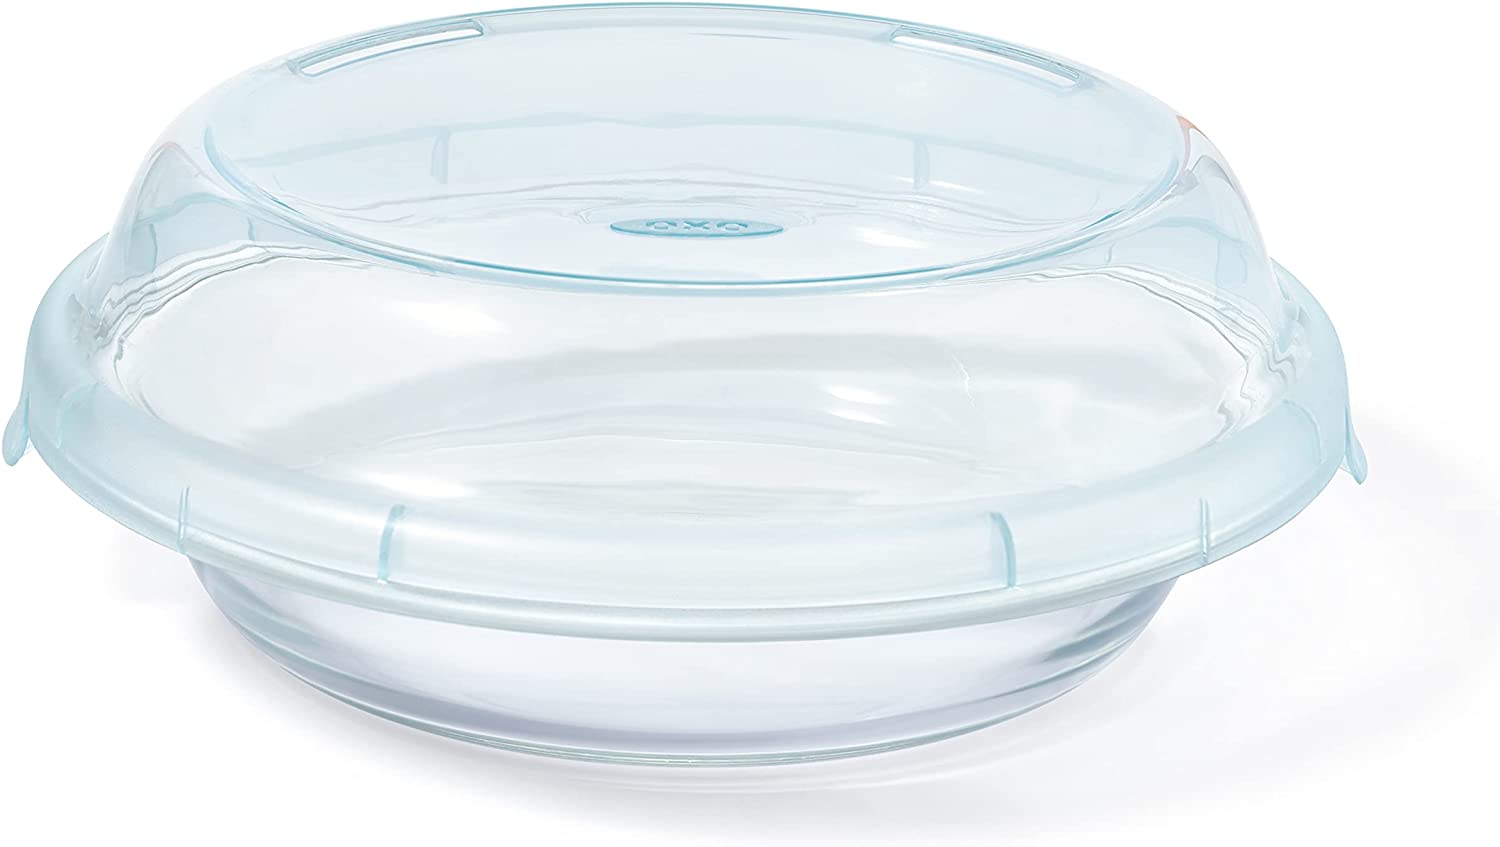 OXO Good Grips Glass Pie Plate with Lid $10.99 + Free Ship w/Prime